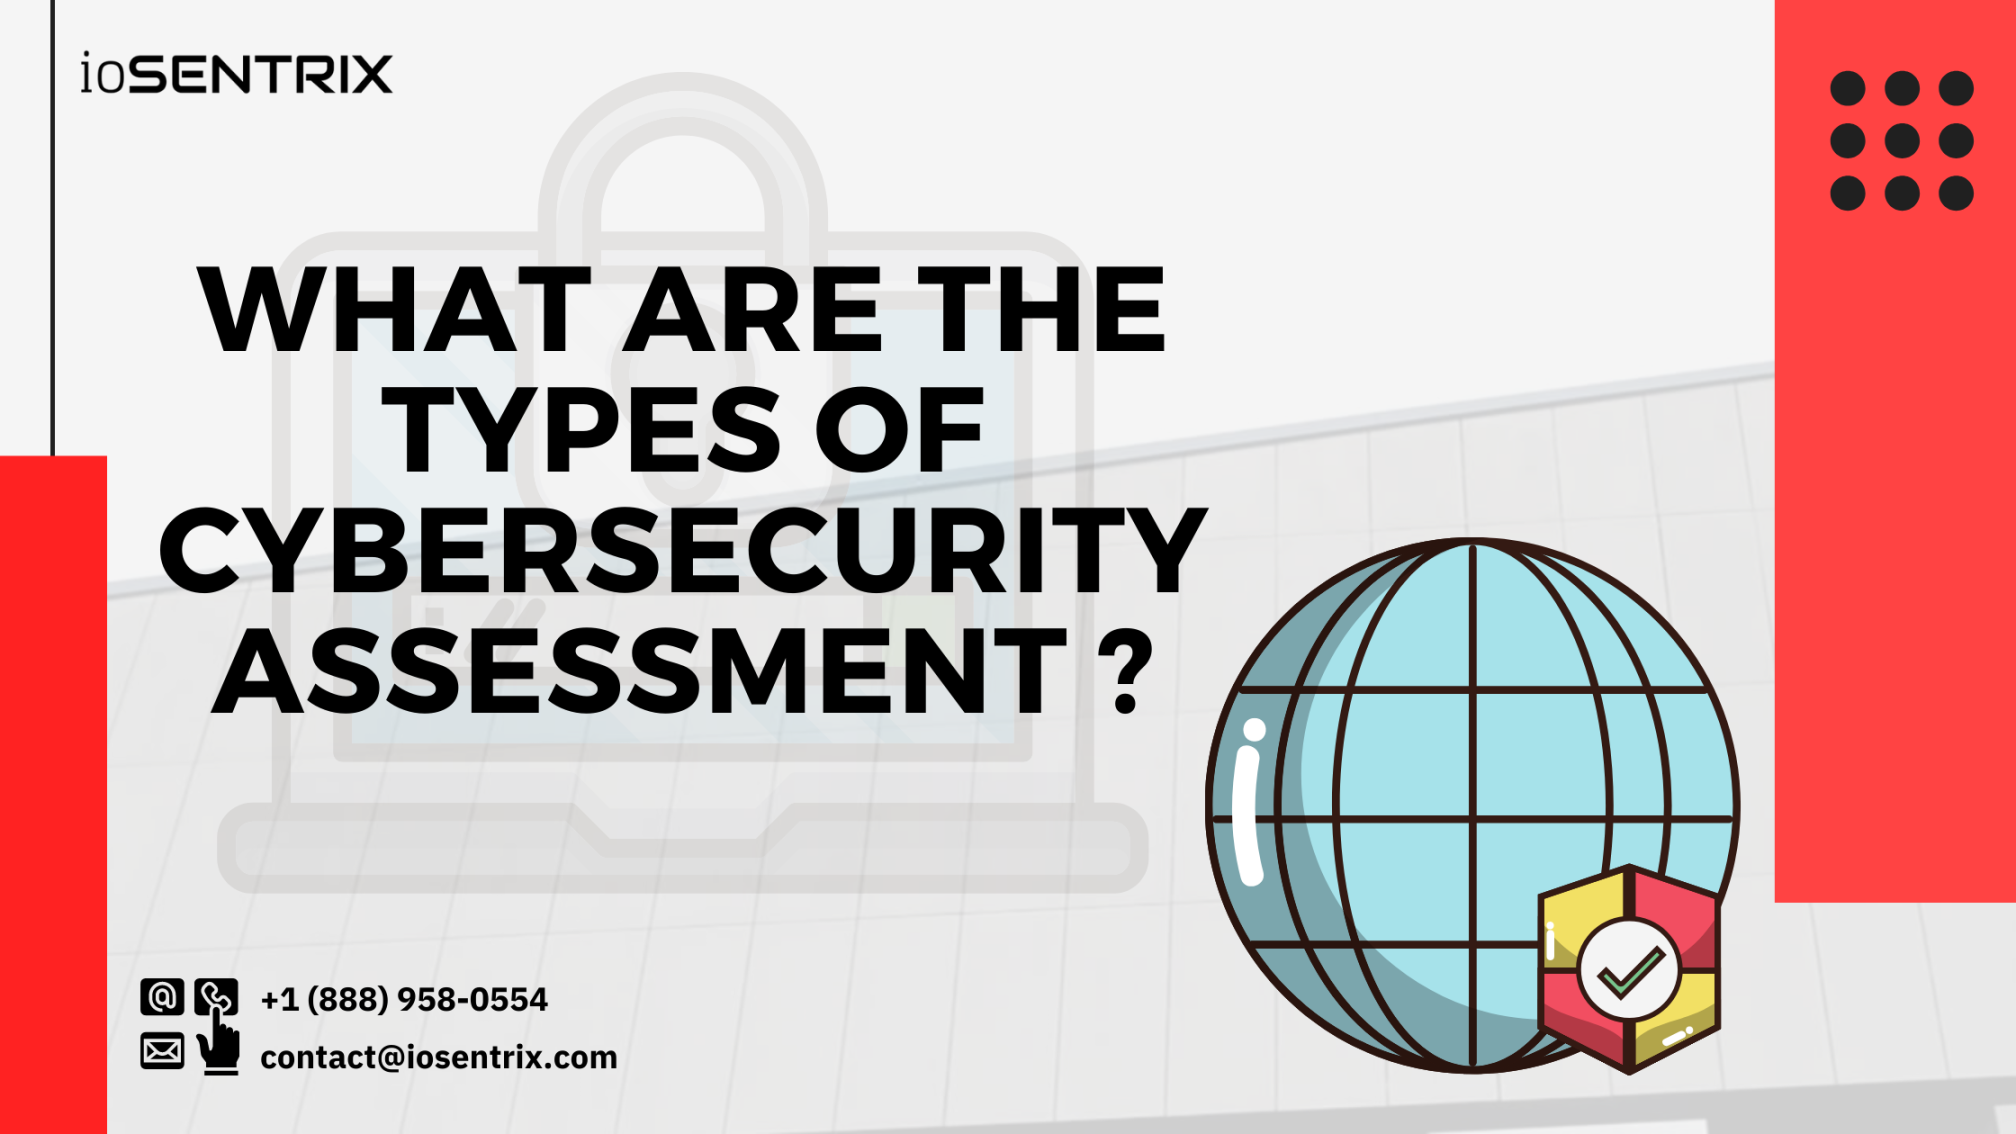 What is cybersecurity assessment, and what are the types of